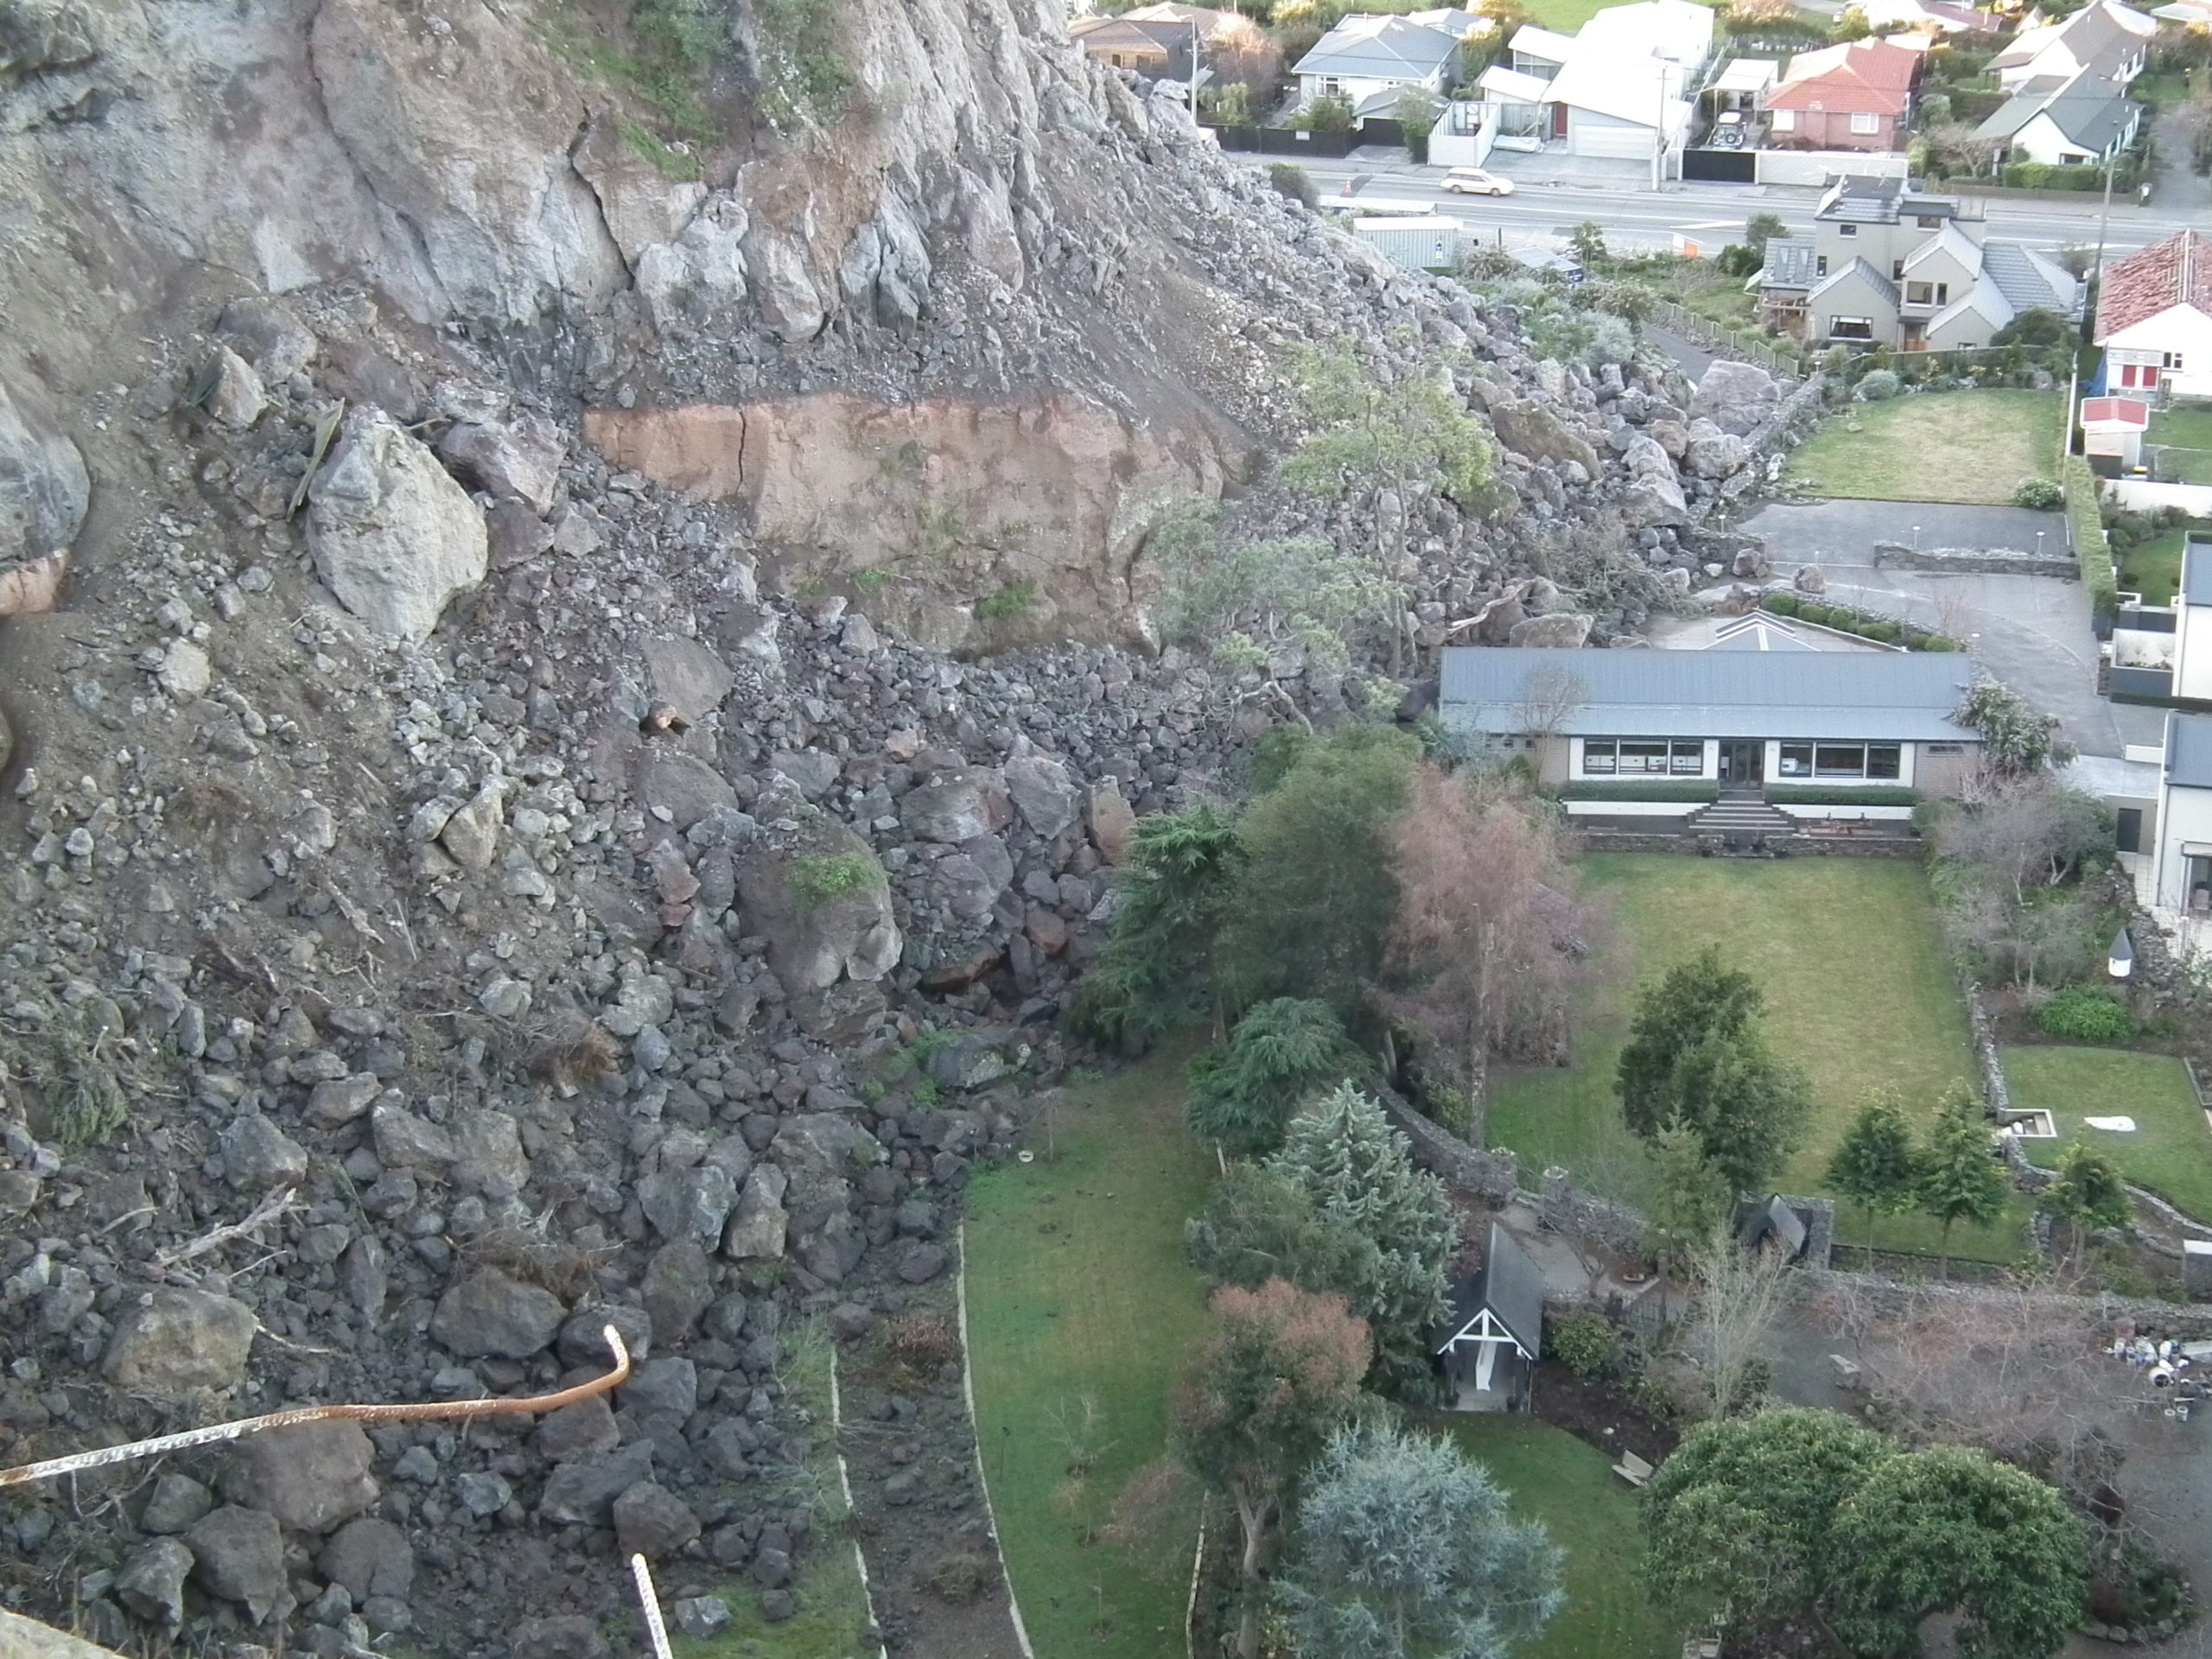 The aftermath of landslides in Christchurch, New Zealand